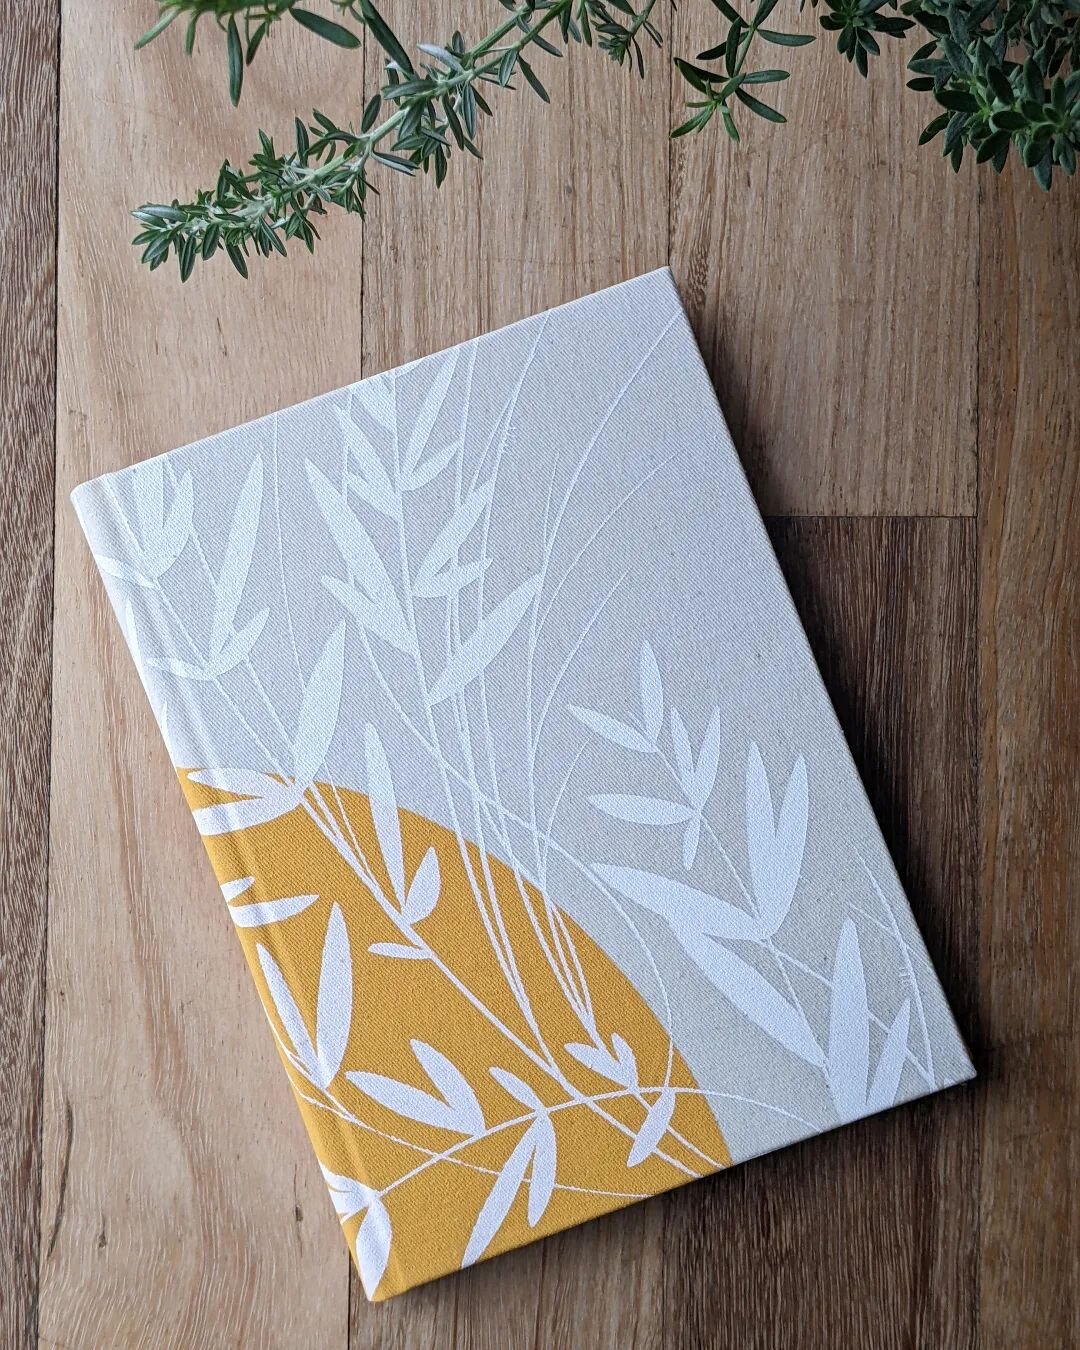 The Handbound Journal captures the love for the craft of hand bounding and screen printing. Carefully handbound by me in my Meanjin/Brisbane studio, from folding the paper and sewing it, to screen printing the beautiful fabric cover. A paper journal 